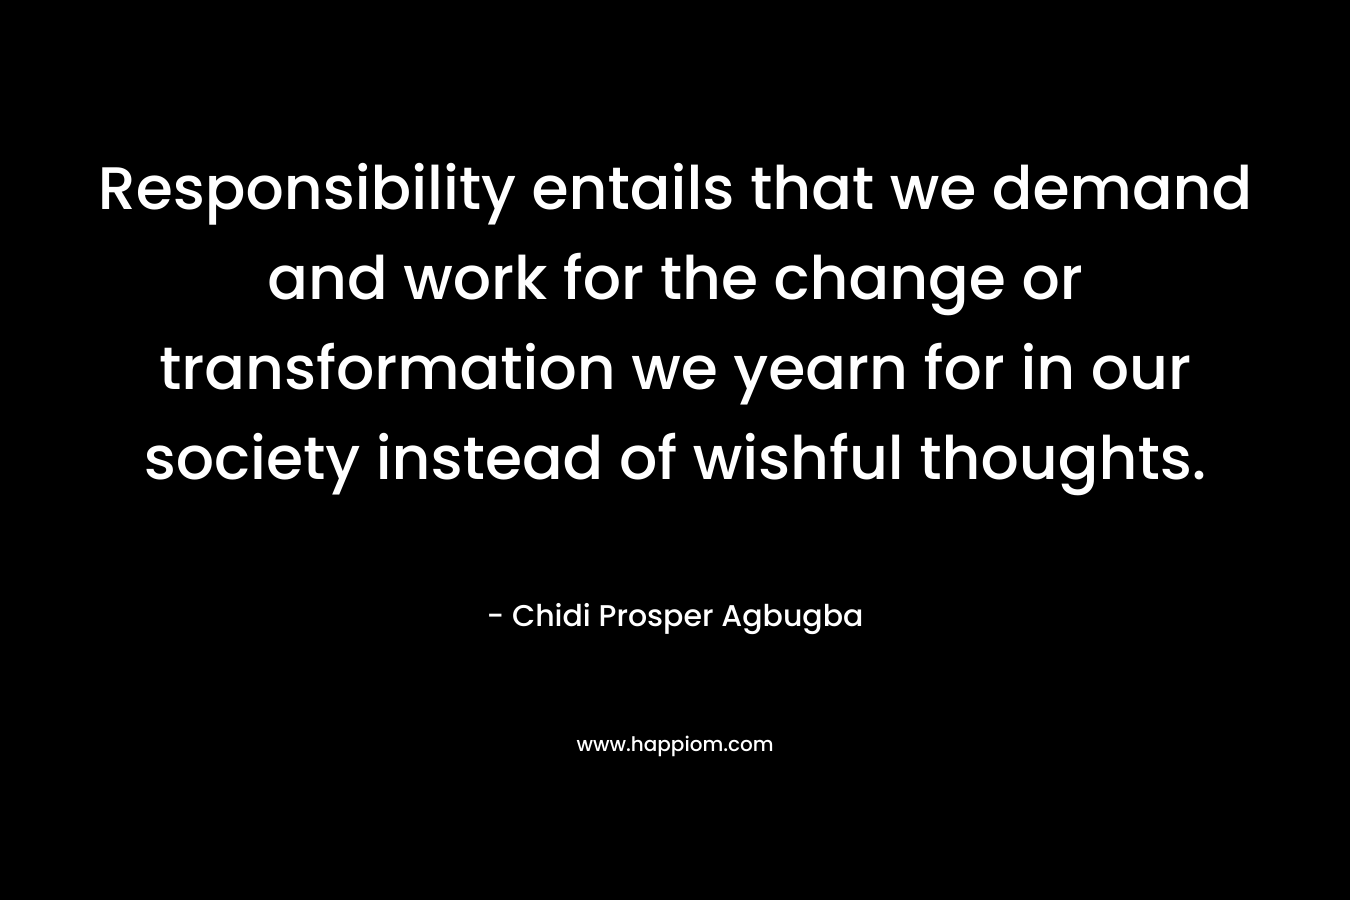 Responsibility entails that we demand and work for the change or transformation we yearn for in our society instead of wishful thoughts. – Chidi Prosper Agbugba